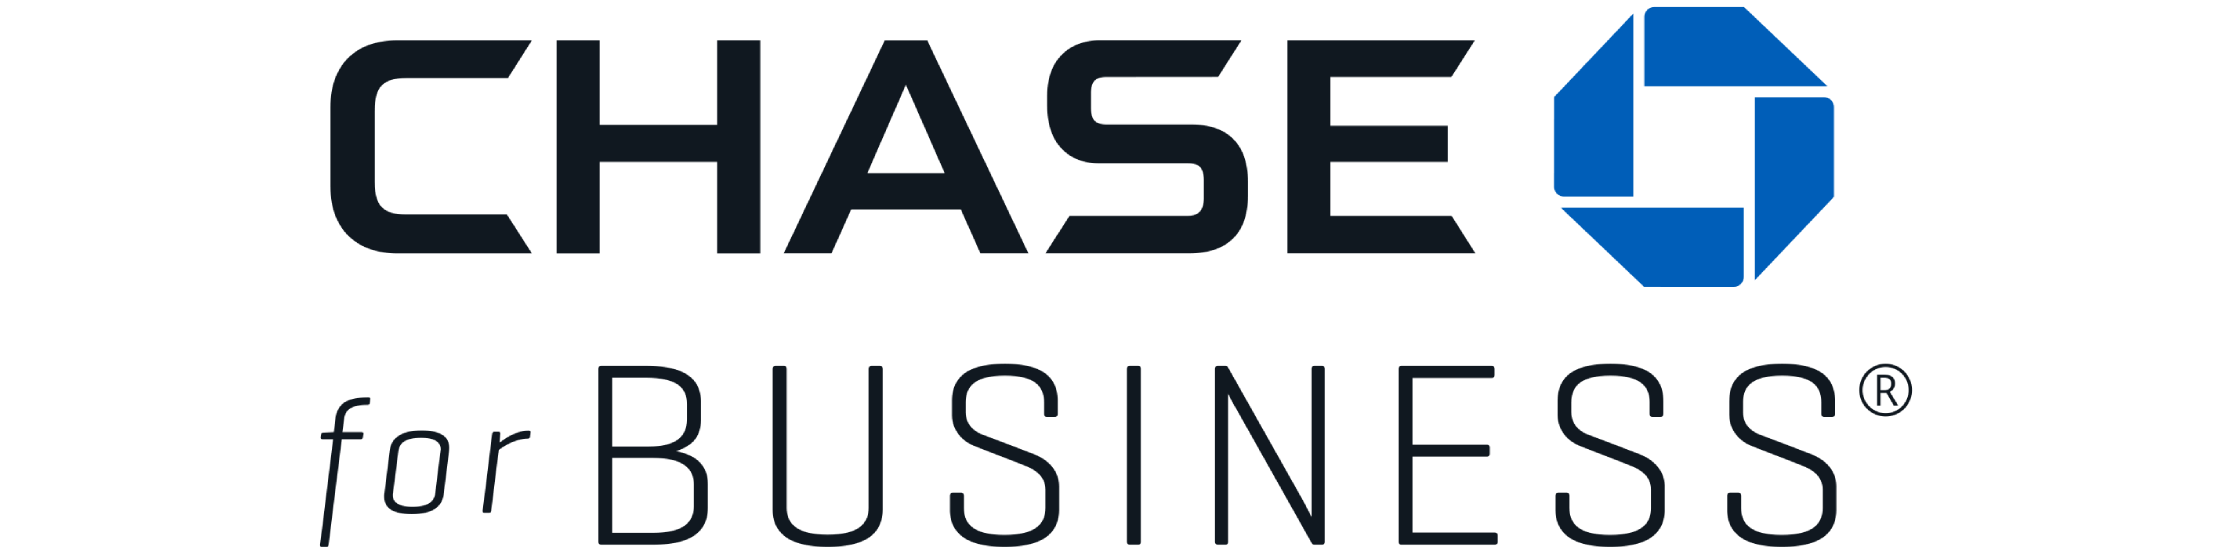 chase business logo